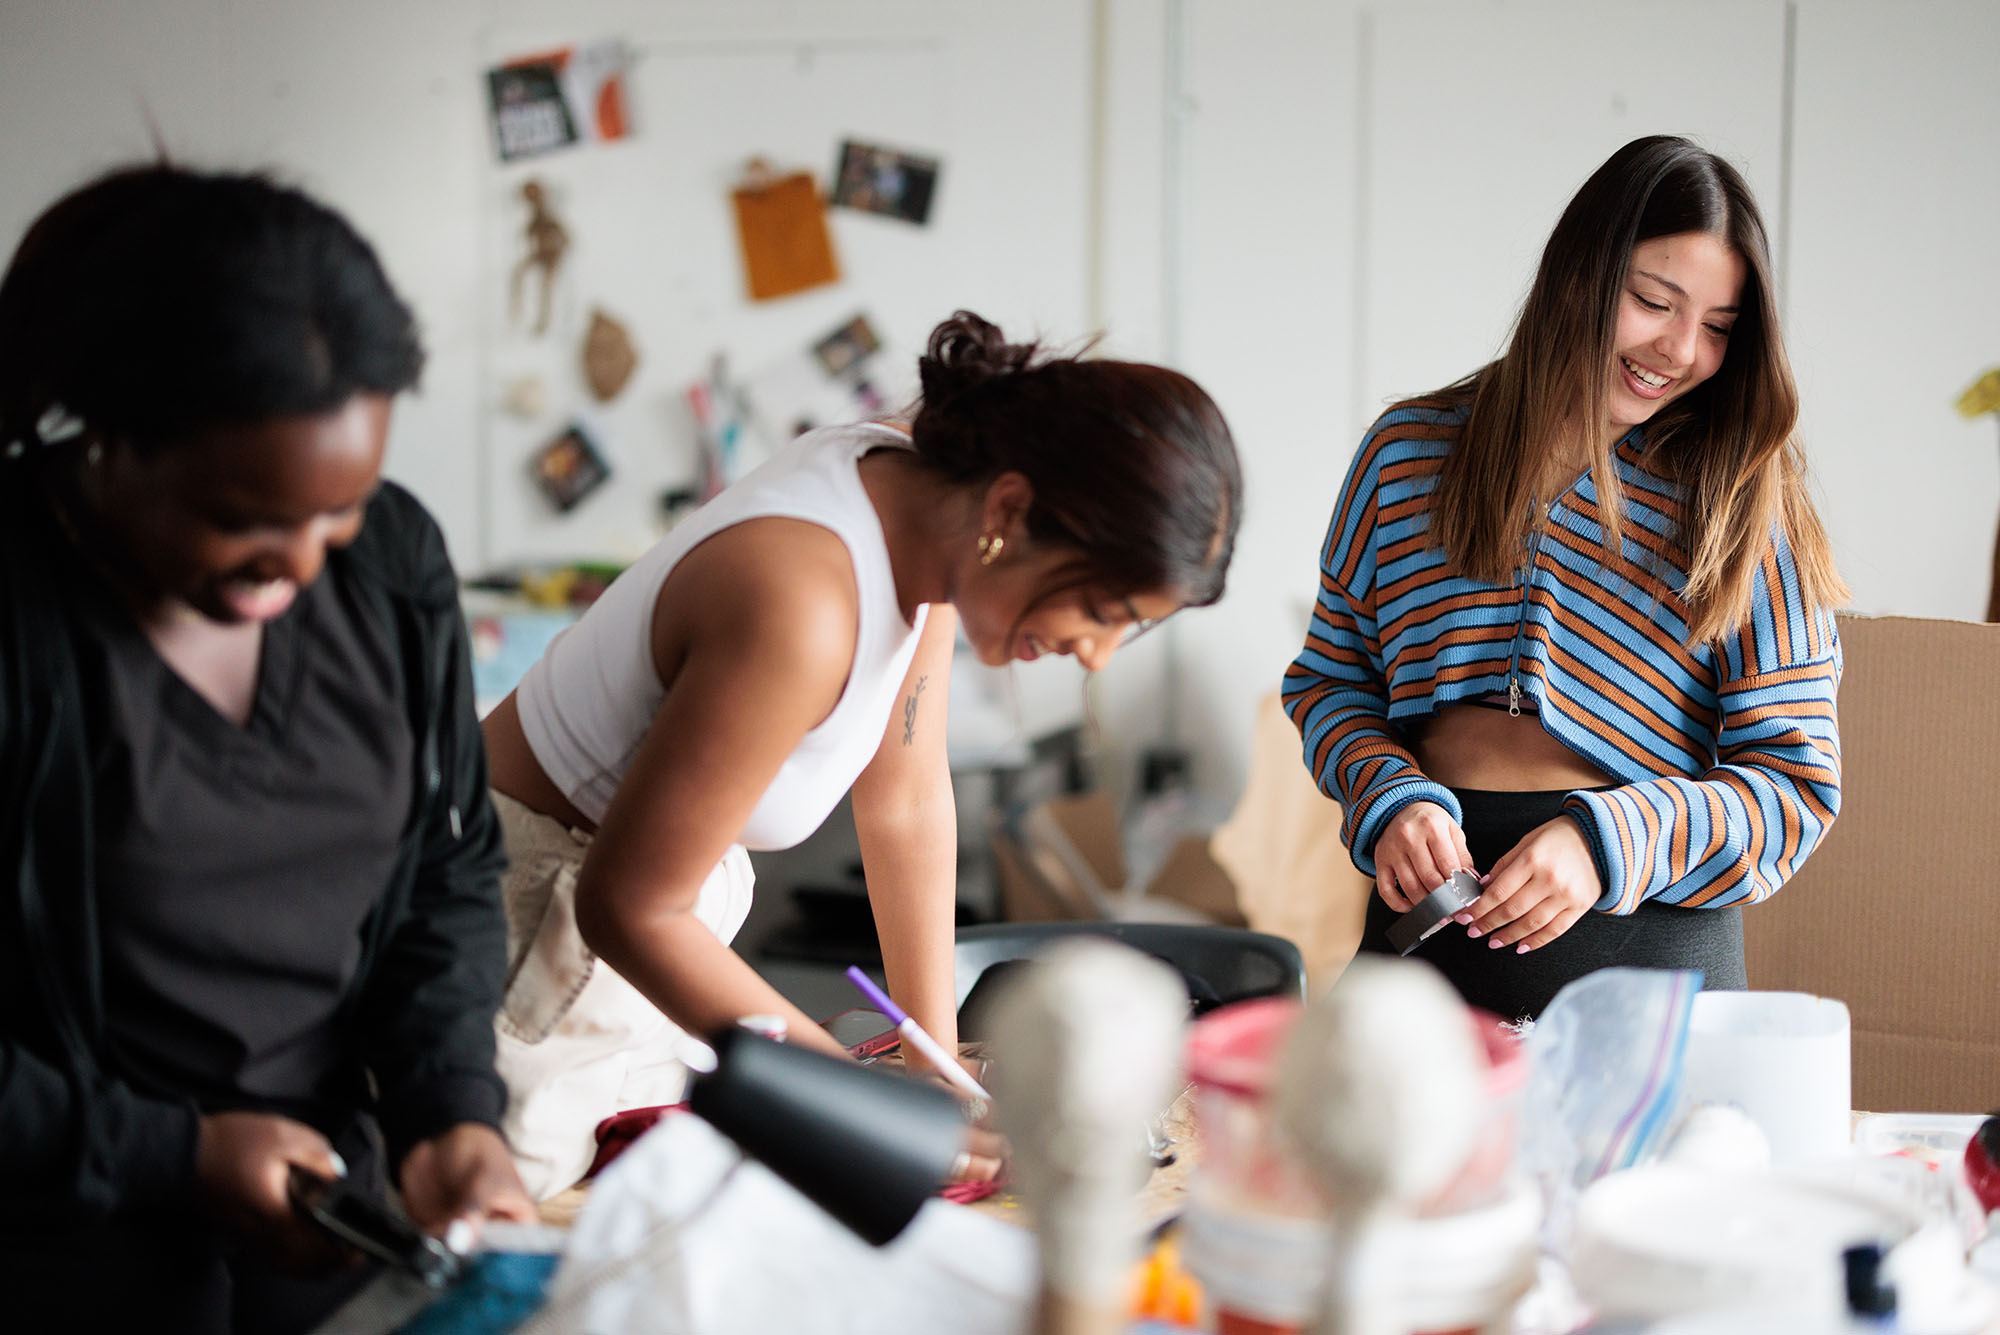 Photo: Three women create and put final touches on puppets. From left, a Black woman in all black. In the middle, an hispanic woman in all white and cream. On the left, a white woman with a striped shirt.